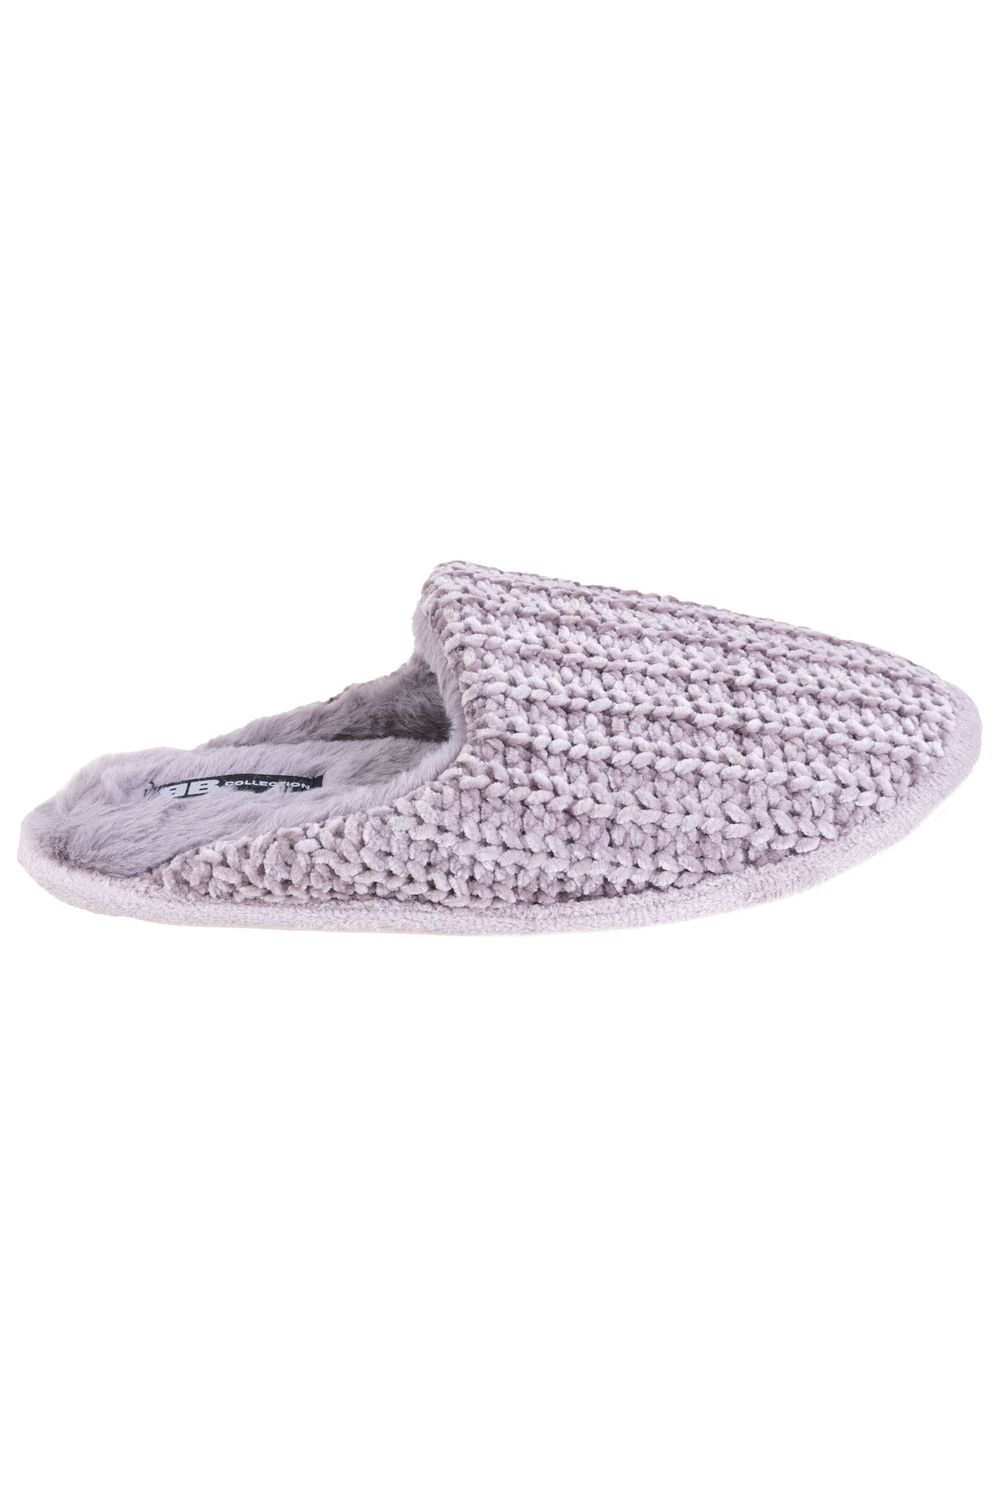 Chenille knit open back slippers, grey, extra large (XL)